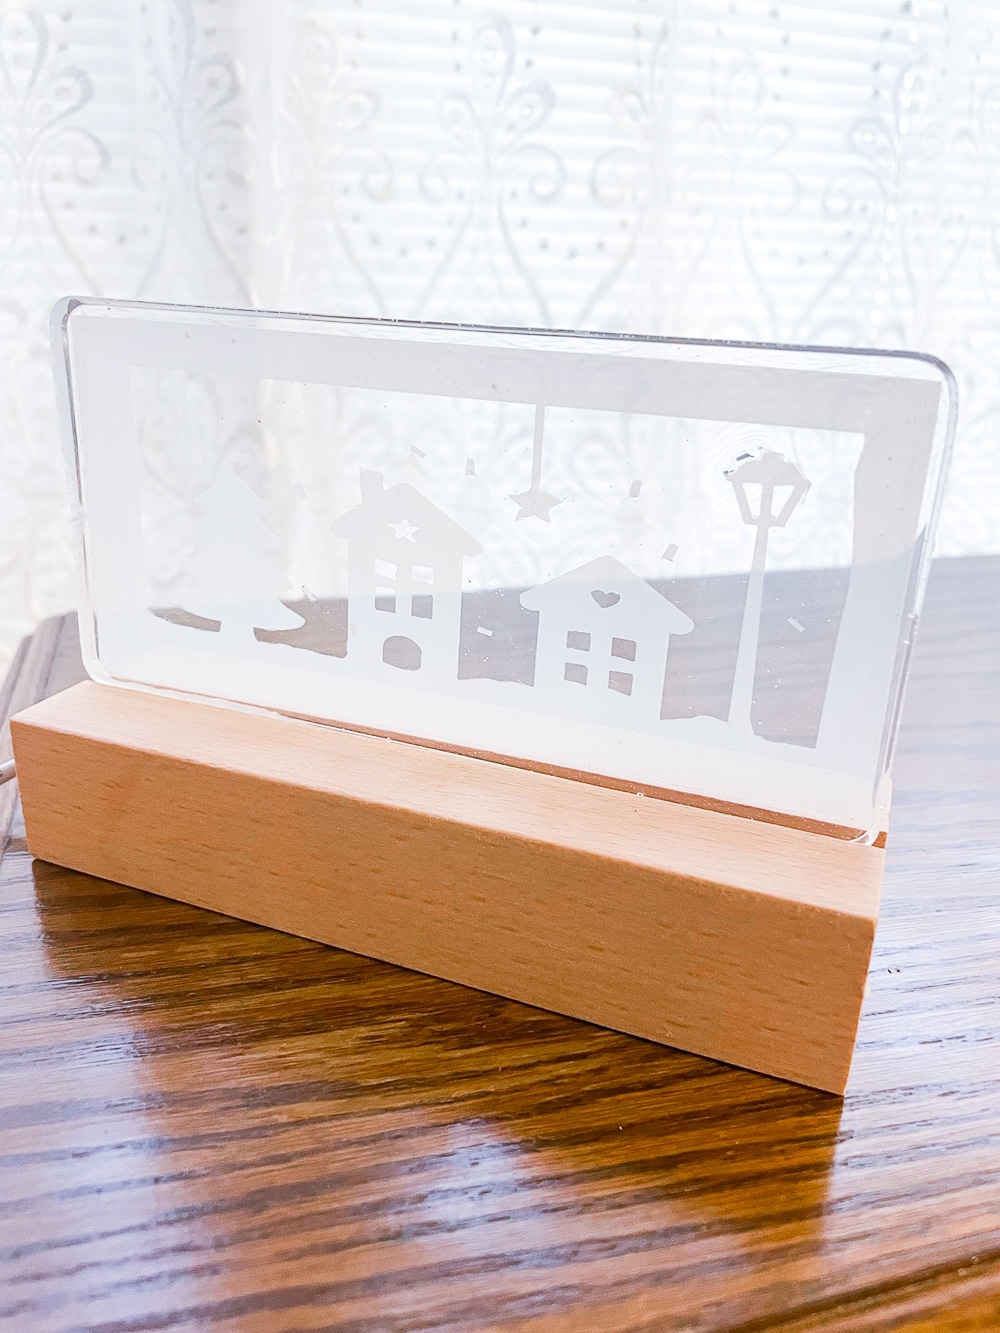 DIY Card Box Made With Cricut - Amber Oliver